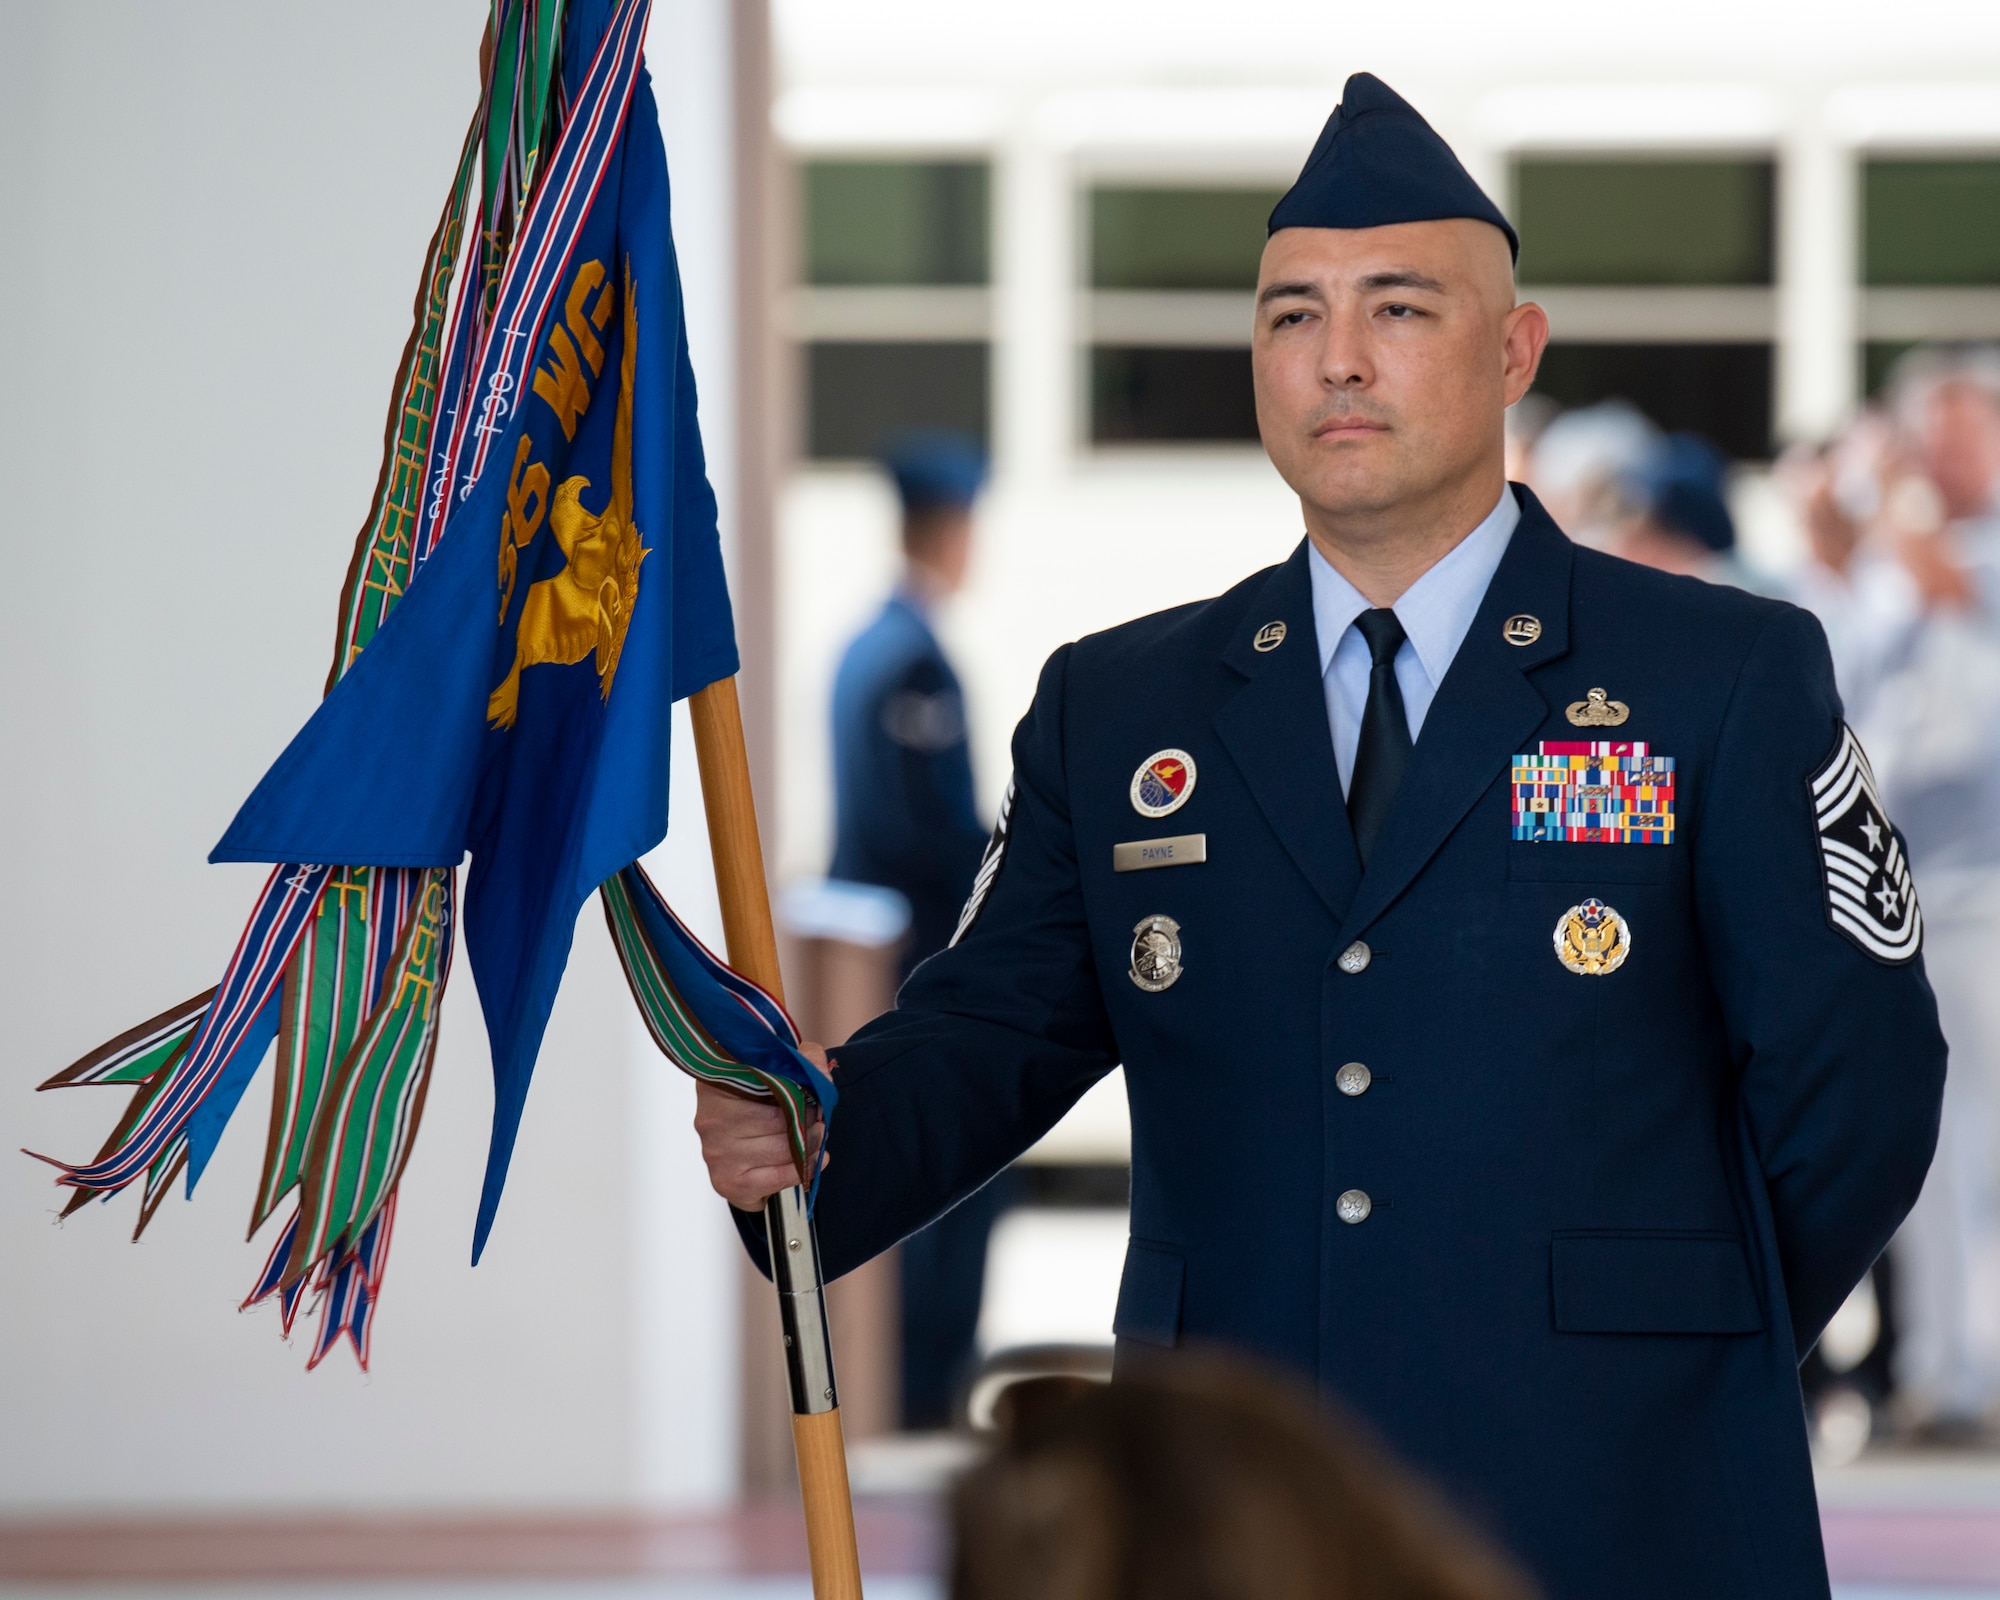 U.S. Air Force Chief Master Sgt. John E. Payne, command chief of the 36th Wing, stands ready with the guidon moments before the begining of the change of command ceremony, June 10, 2022, at Andersen Air Force Base, Guam. The 36th Wing is comprised of five groups and 18 squadrons, executing Indo-Pacific Command's Bomber Task Force, Theater Security Packages, Contingency Response Operations and peacetime and combat operations in the Indo-Pacific Region. The Wing is also tasked to ensure the successful deployment, employment and integration of air and space forces from the most forward sovereign U.S. Air Force Base in the Indo-Pacific Region. (U.S. Air Force photos by Staff Sgt. Ryan Brooks)